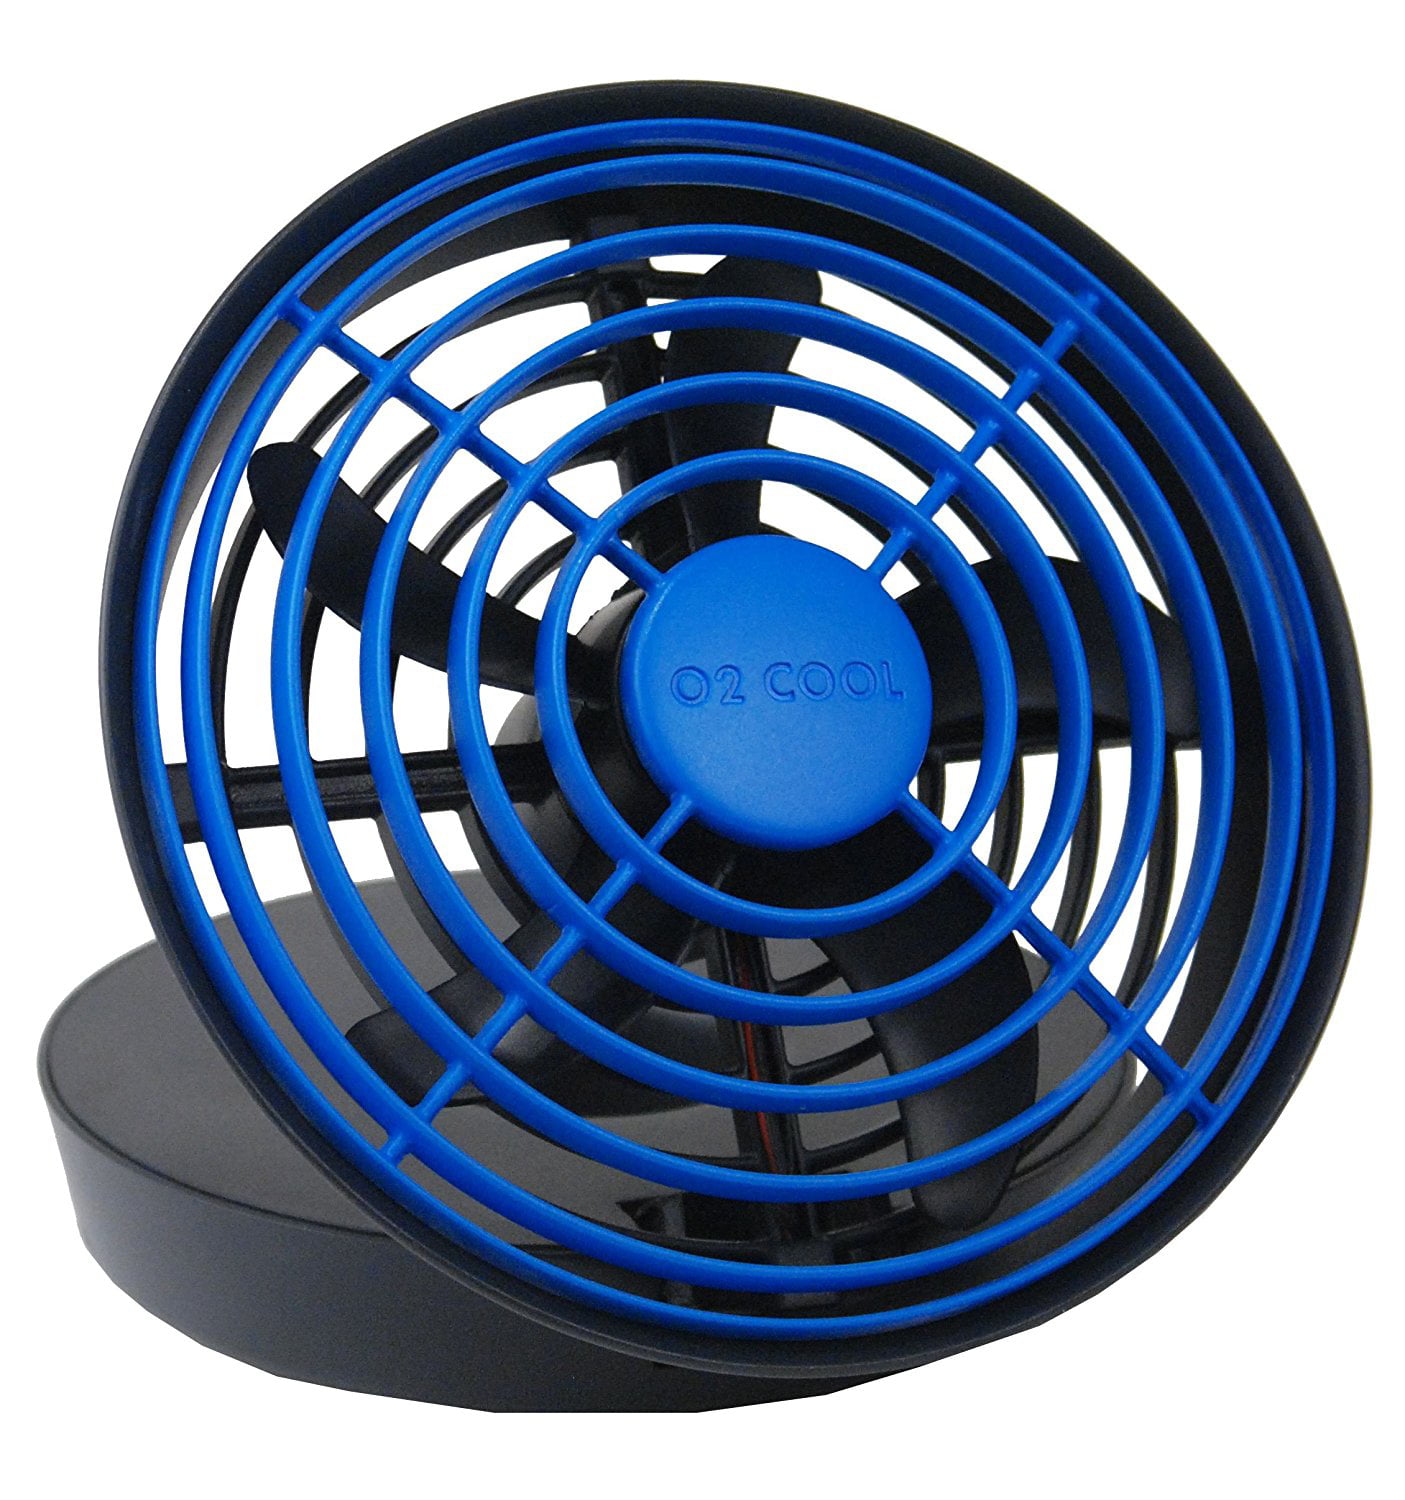 O2cool Fd05033 Battery Or Usb Powered Portable Fan Assorted